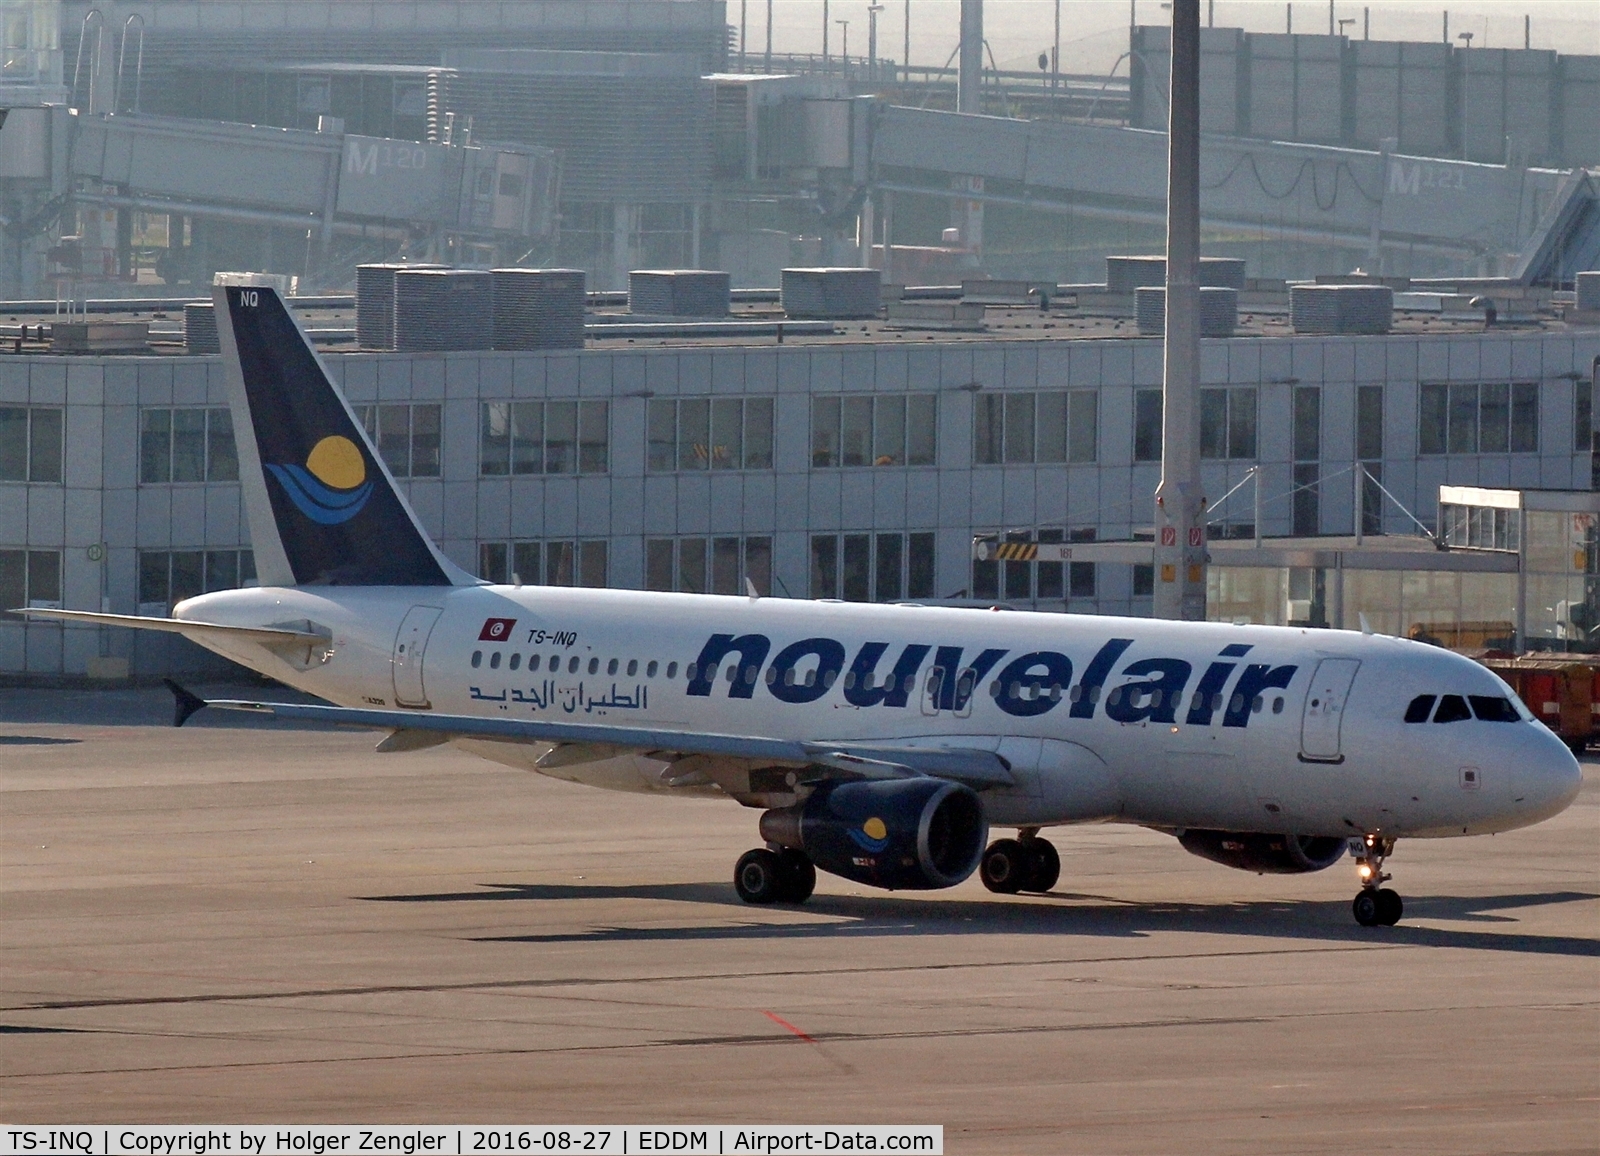 TS-INQ, 2004 Airbus A320-214 C/N 2158, Leaving parking position for a ride to NBE...